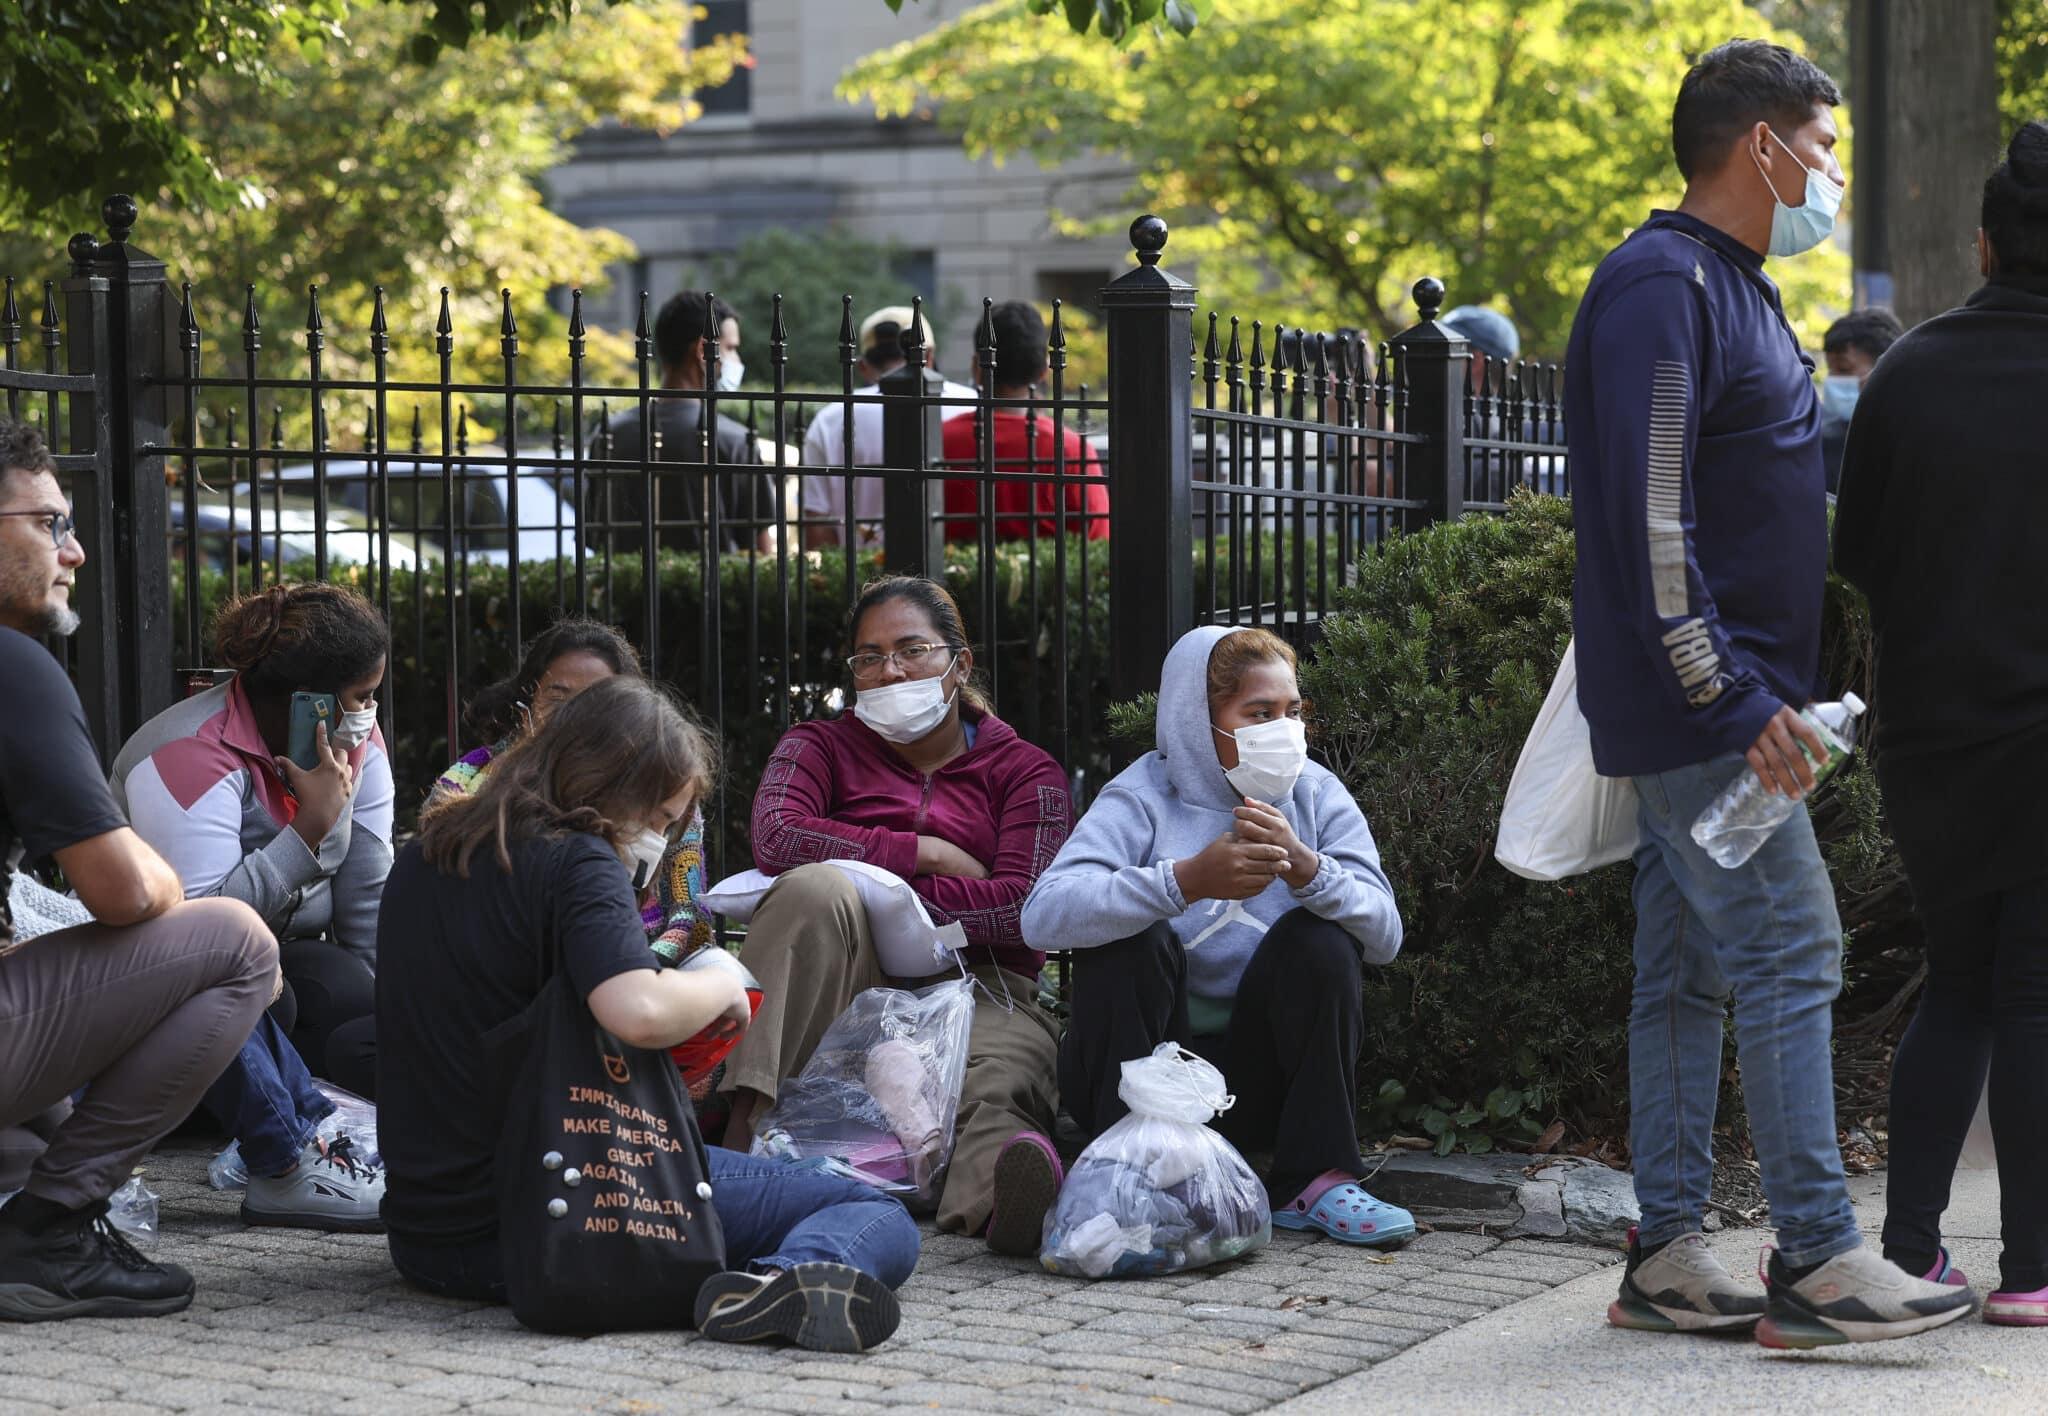 WASHINGTON, DC - SEPTEMBER 15: Migrants from Central and South America wait near the residence of US Vice President Kamala Harris after being dropped off on September 15, 2022 in Washington, DC. Texas Governor Greg Abbott dispatched buses carrying migrants from the southern border to Harris' home early Thursday morning. (Photo by Kevin Dietsch/Getty Images)